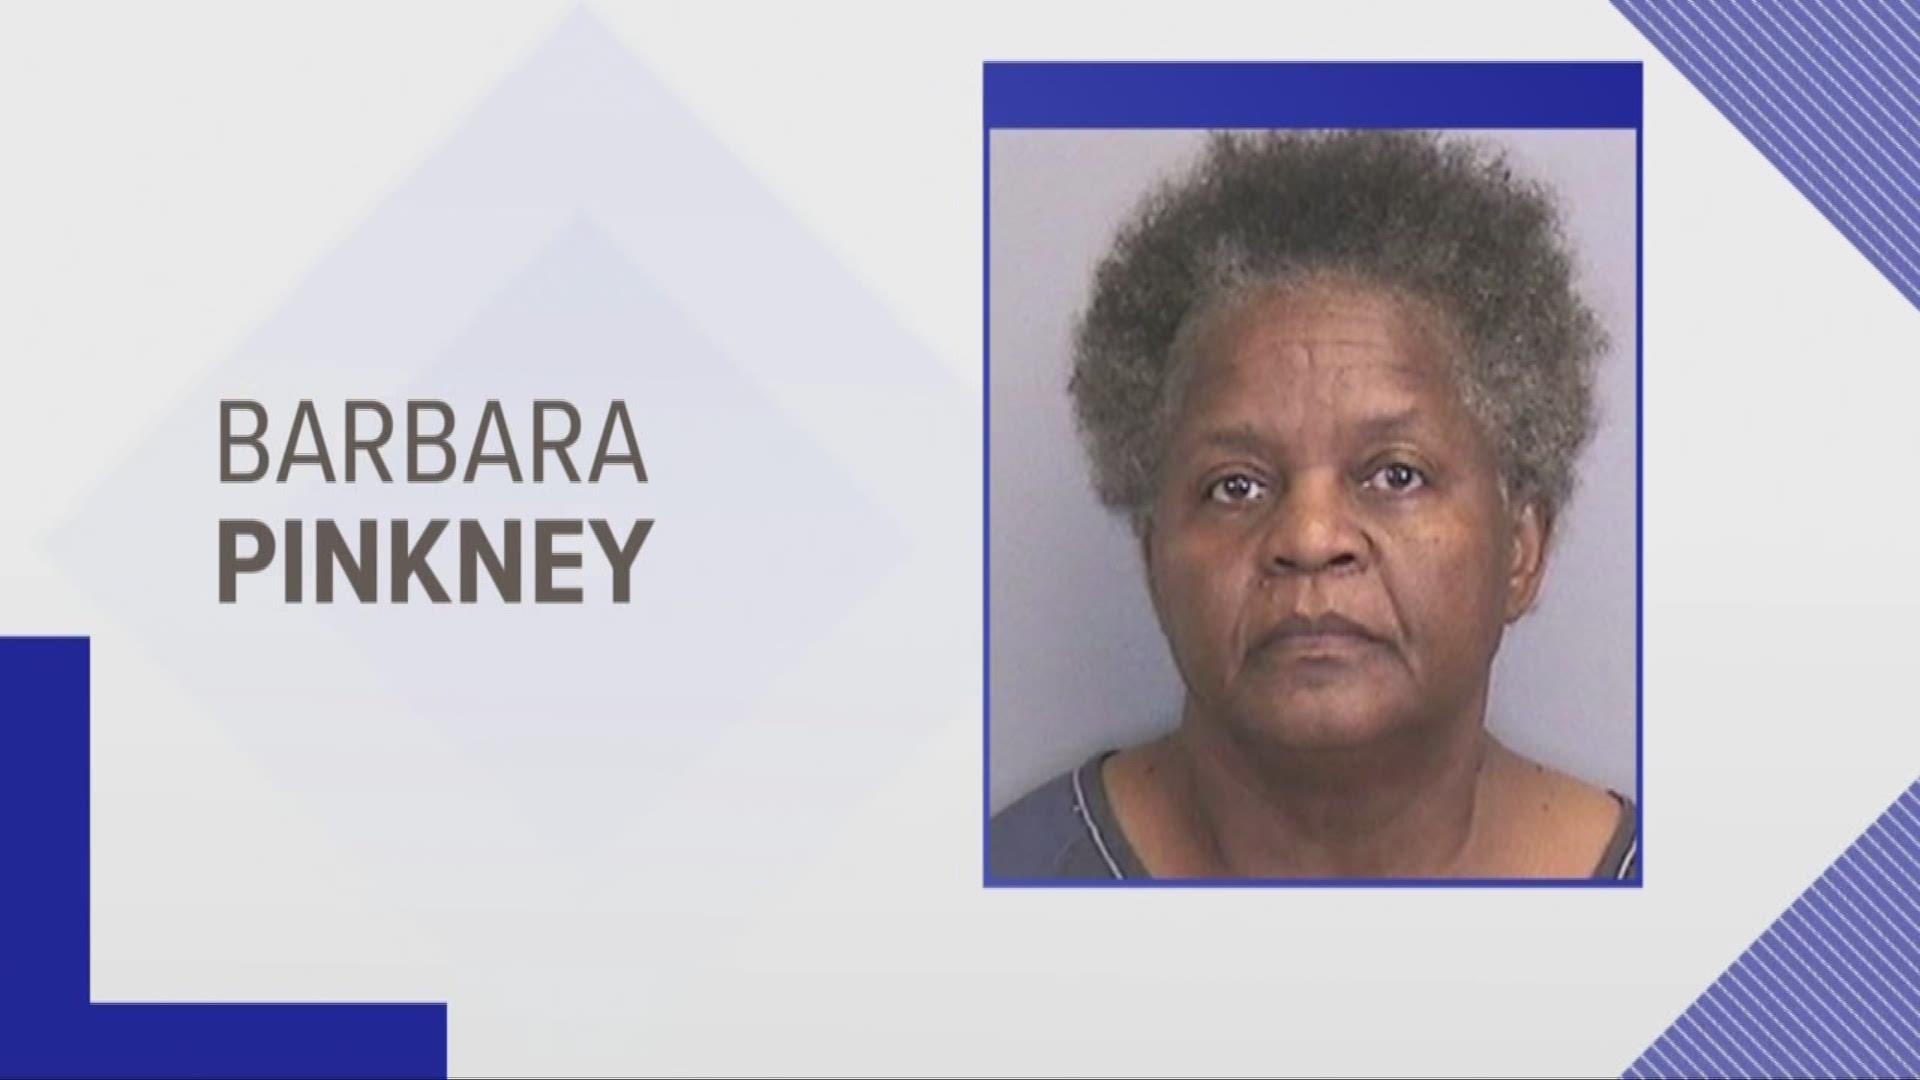 The Manatee County Sheriff’s Office said they were serving an arrest warrant for somebody they said was inside the home with Barbara Pinkney.